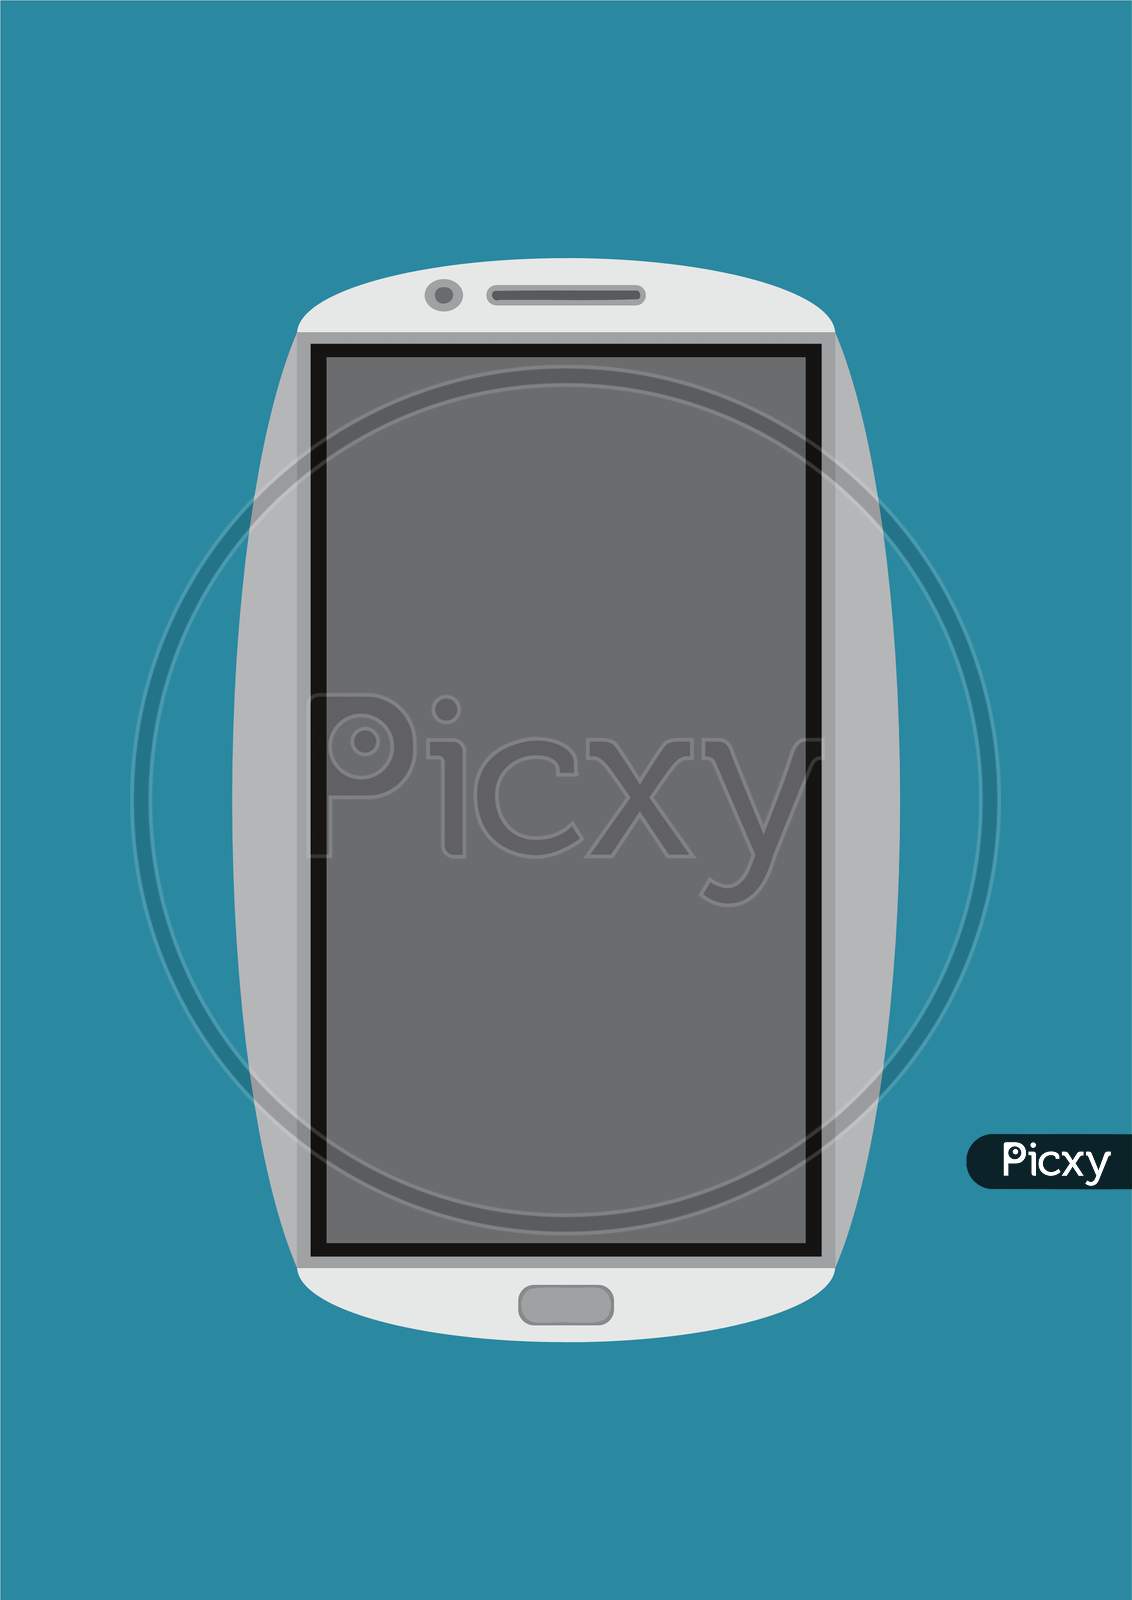 Picture Of A White Color, Curve Shape, Touch Screen Smartphone Graphic Design Having In Blue Background.